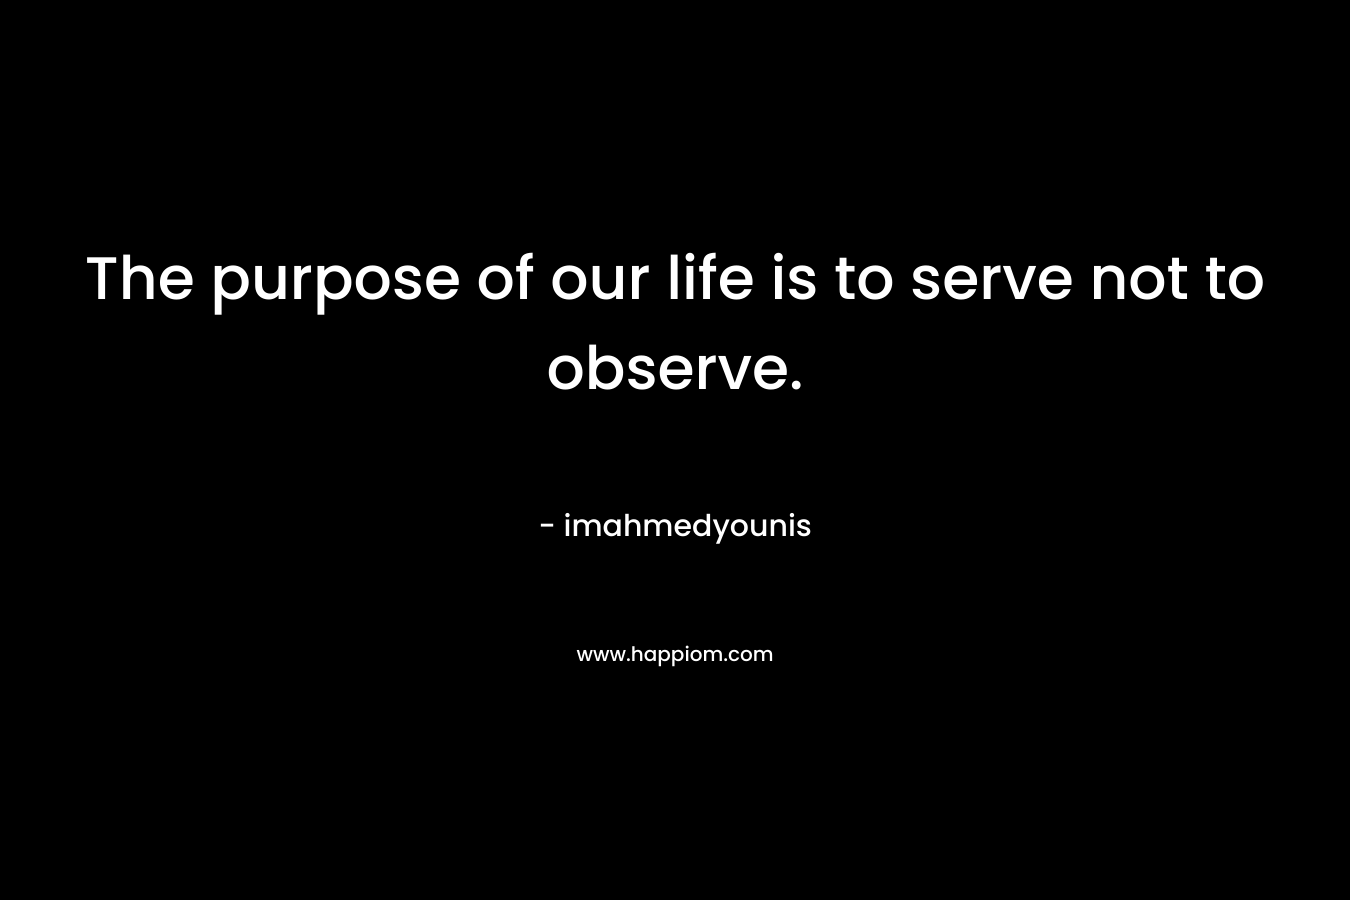 The purpose of our life is to serve not to observe.